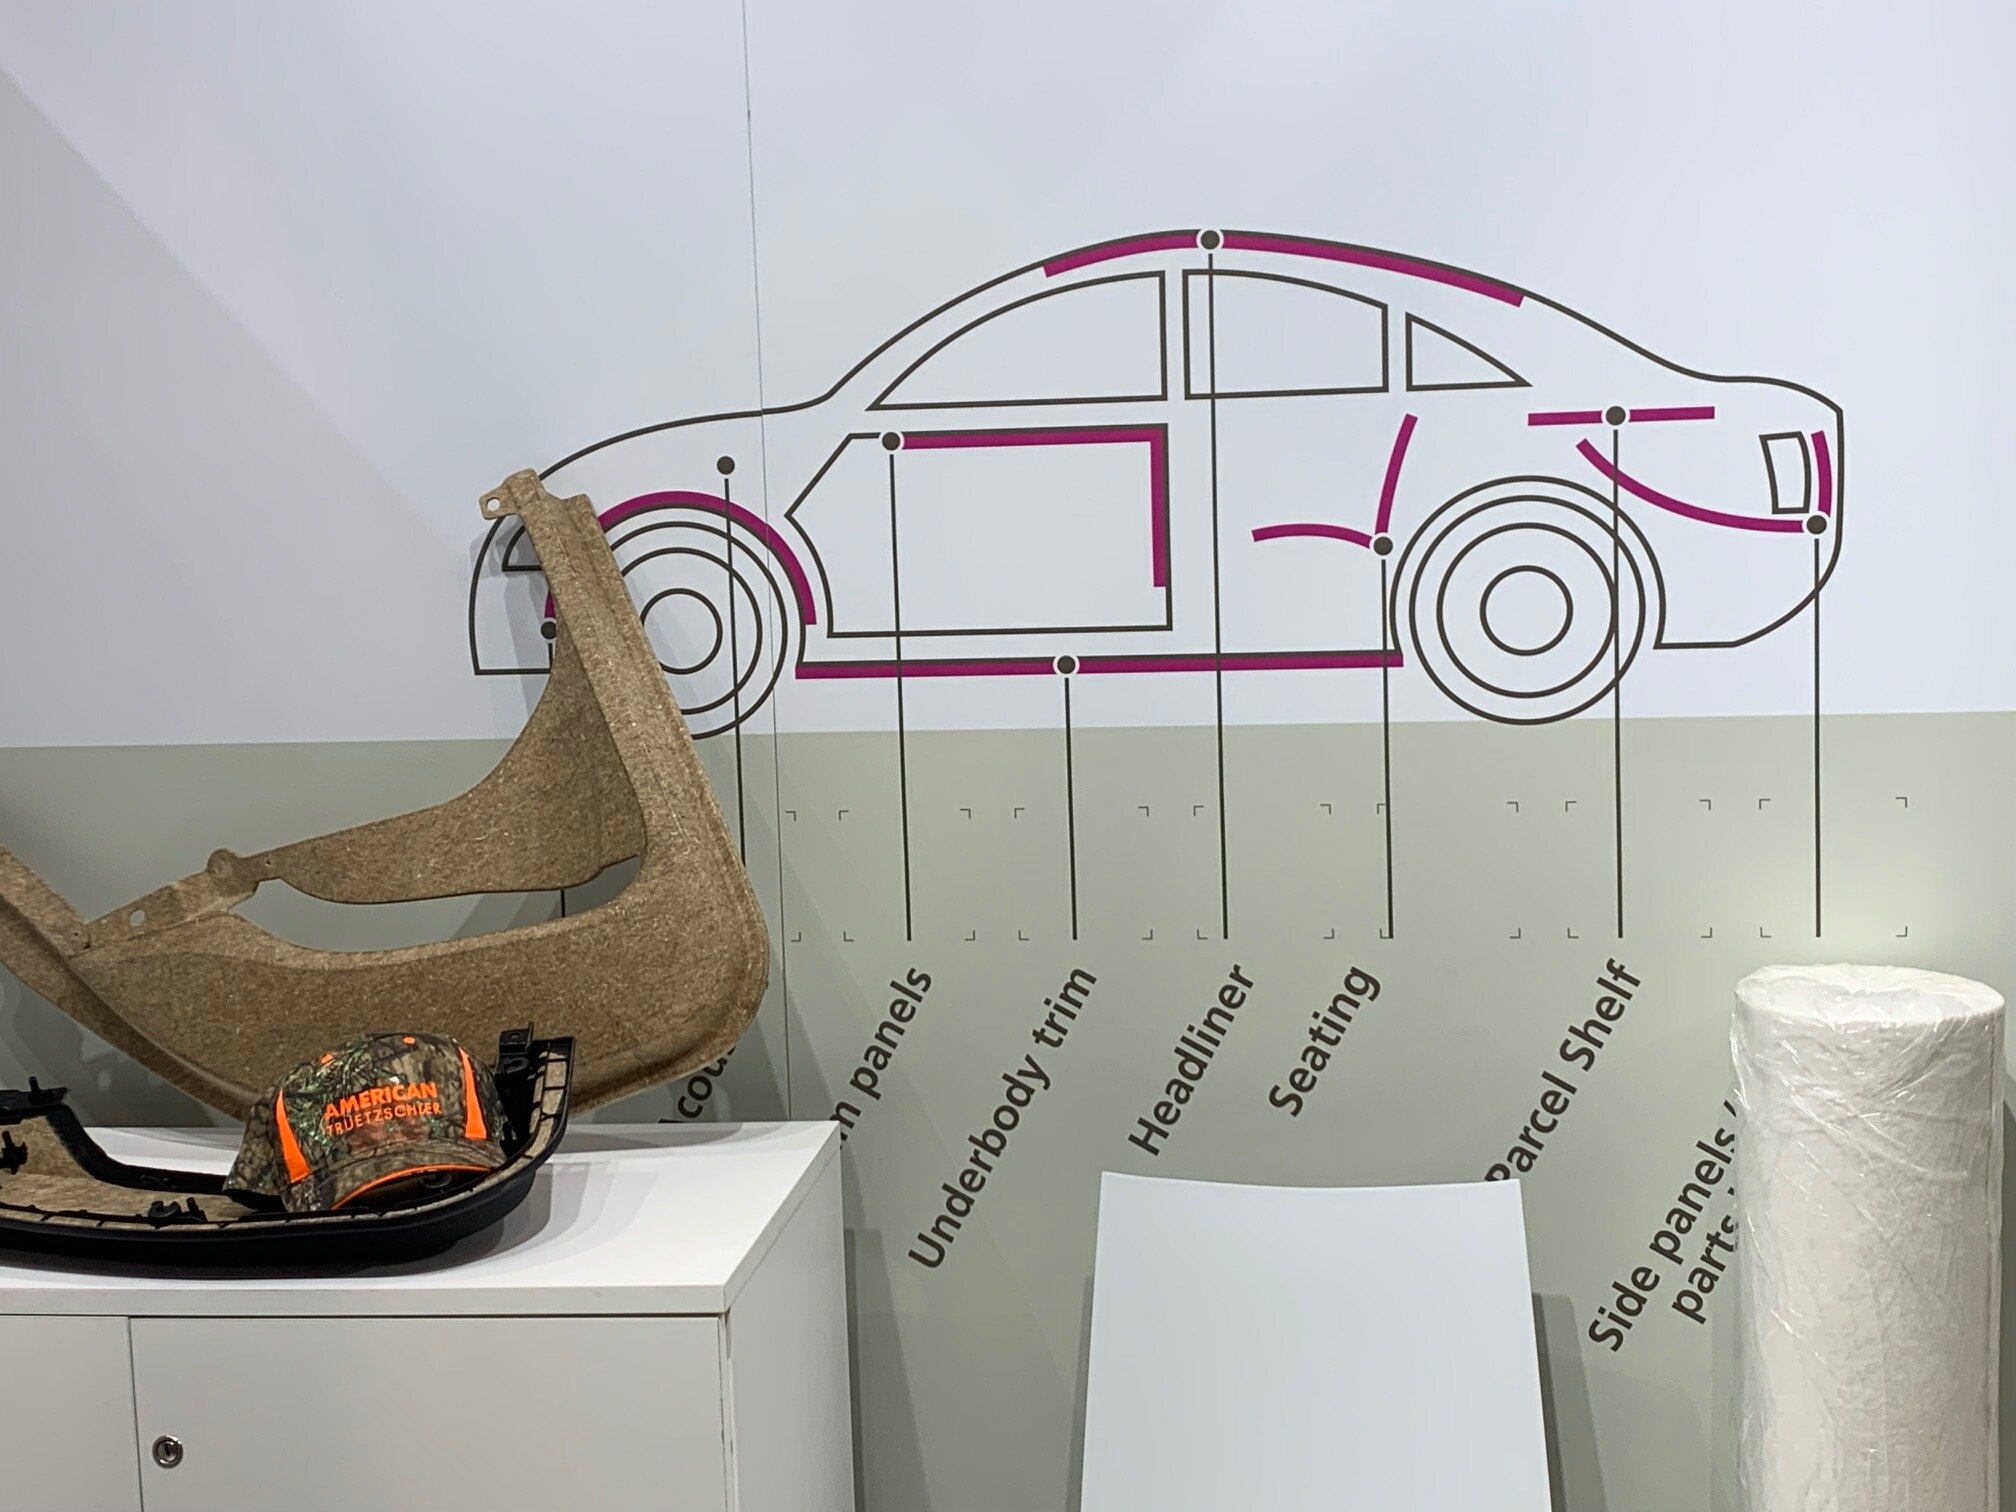 Hemp fiber nonwovens are already being used to manufacture multiple parts for the auto industry in the U.S., as exhibited here by Polyviles.